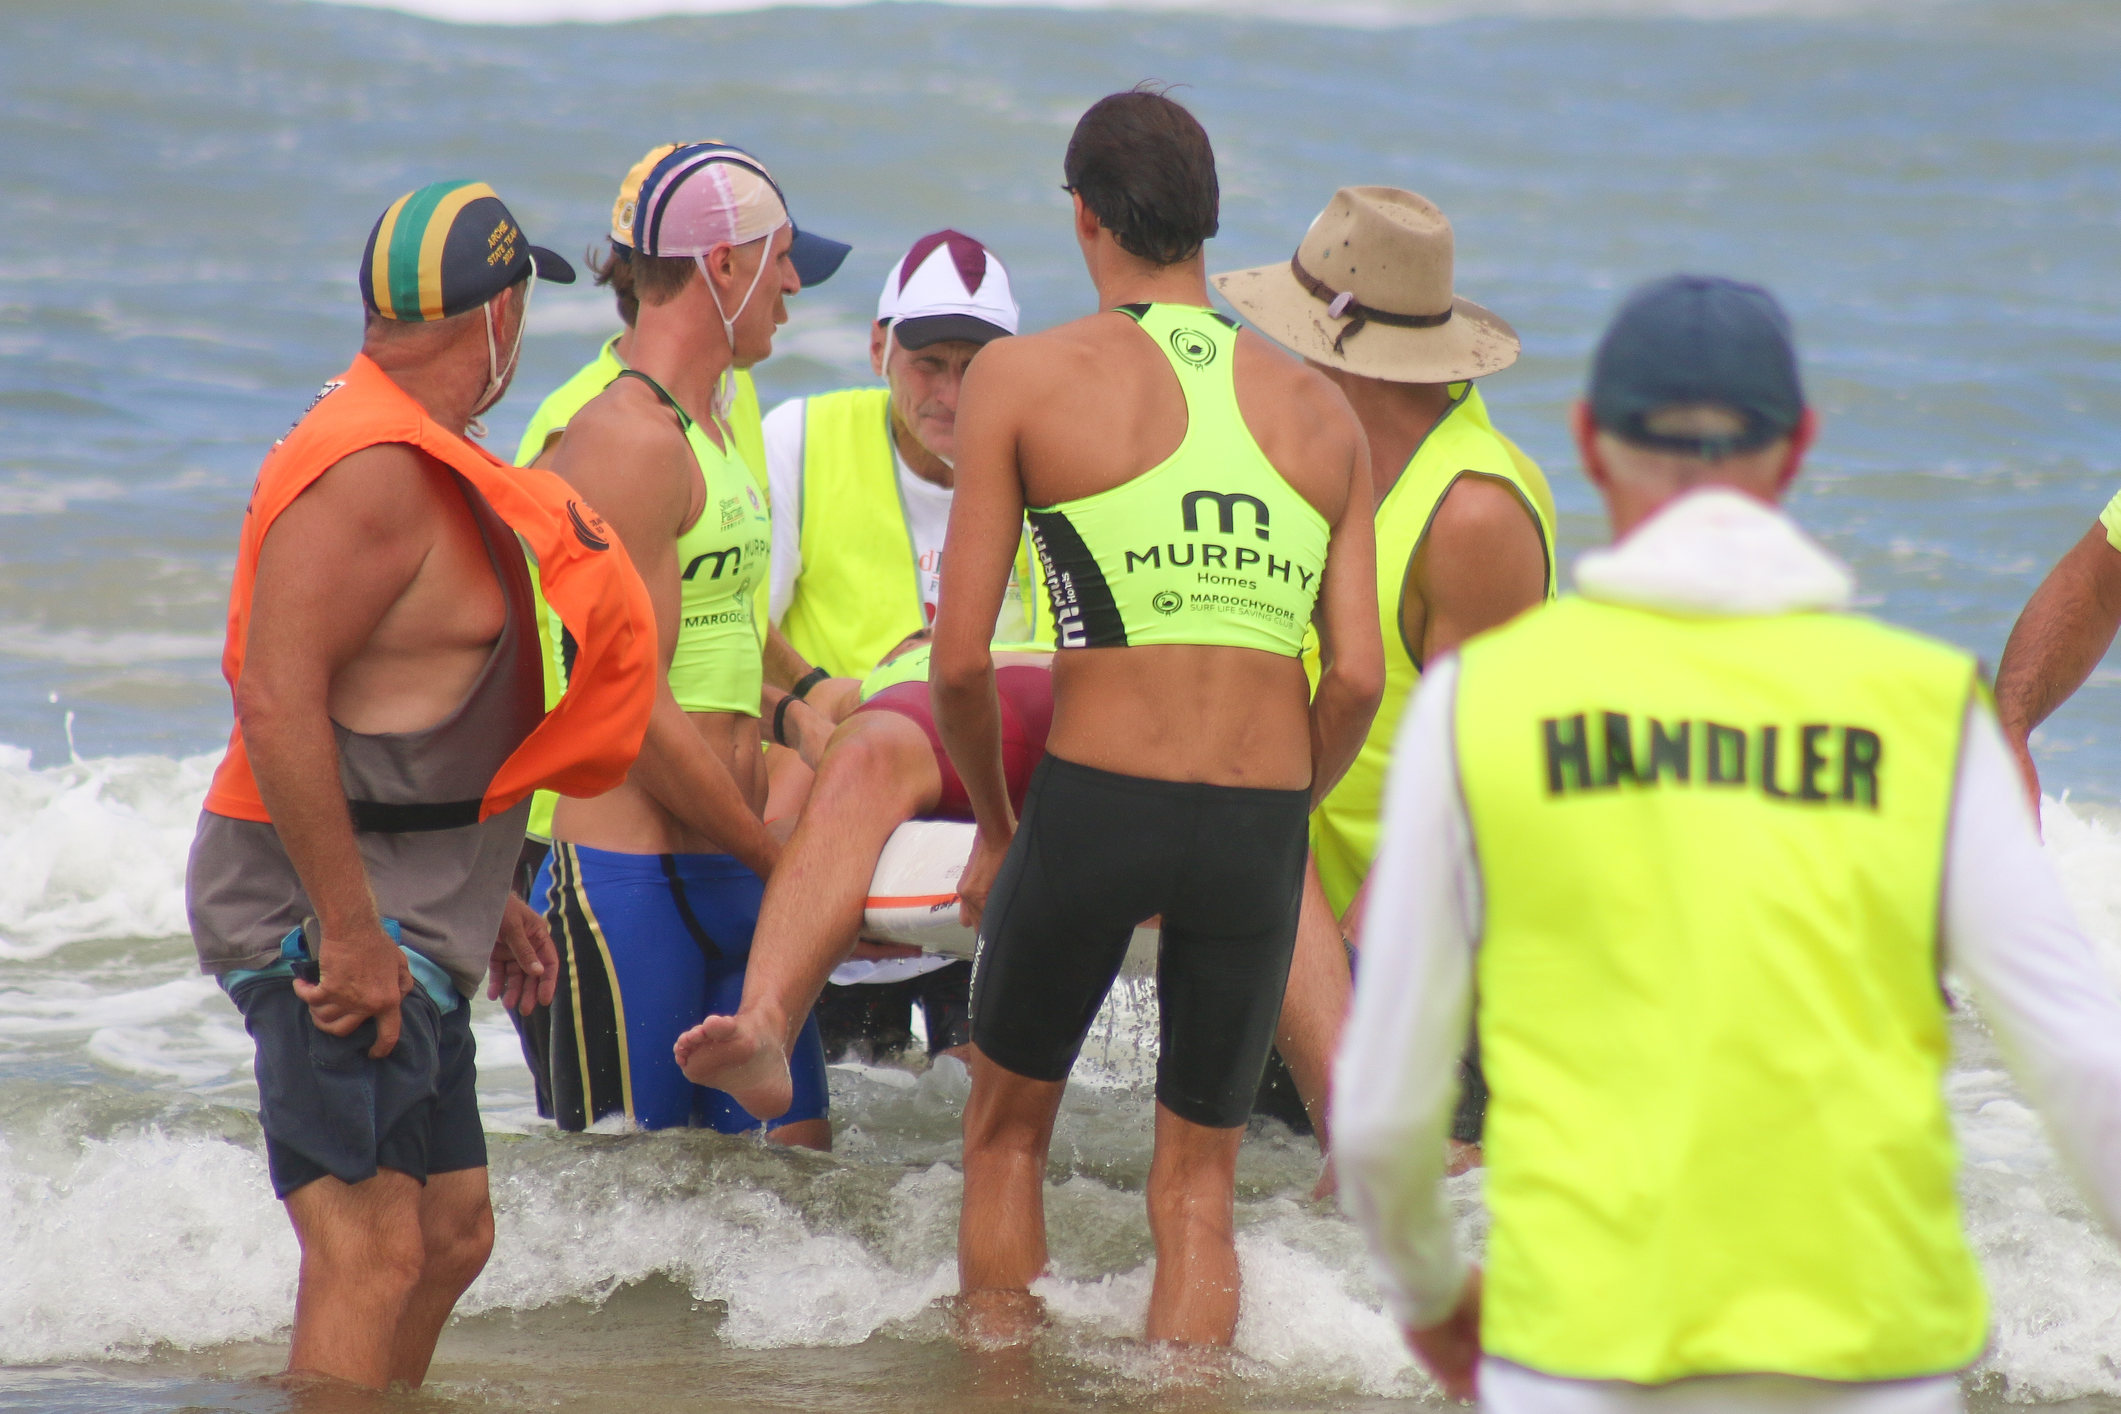 Elite ironman hospitalised after being rescued mid-race